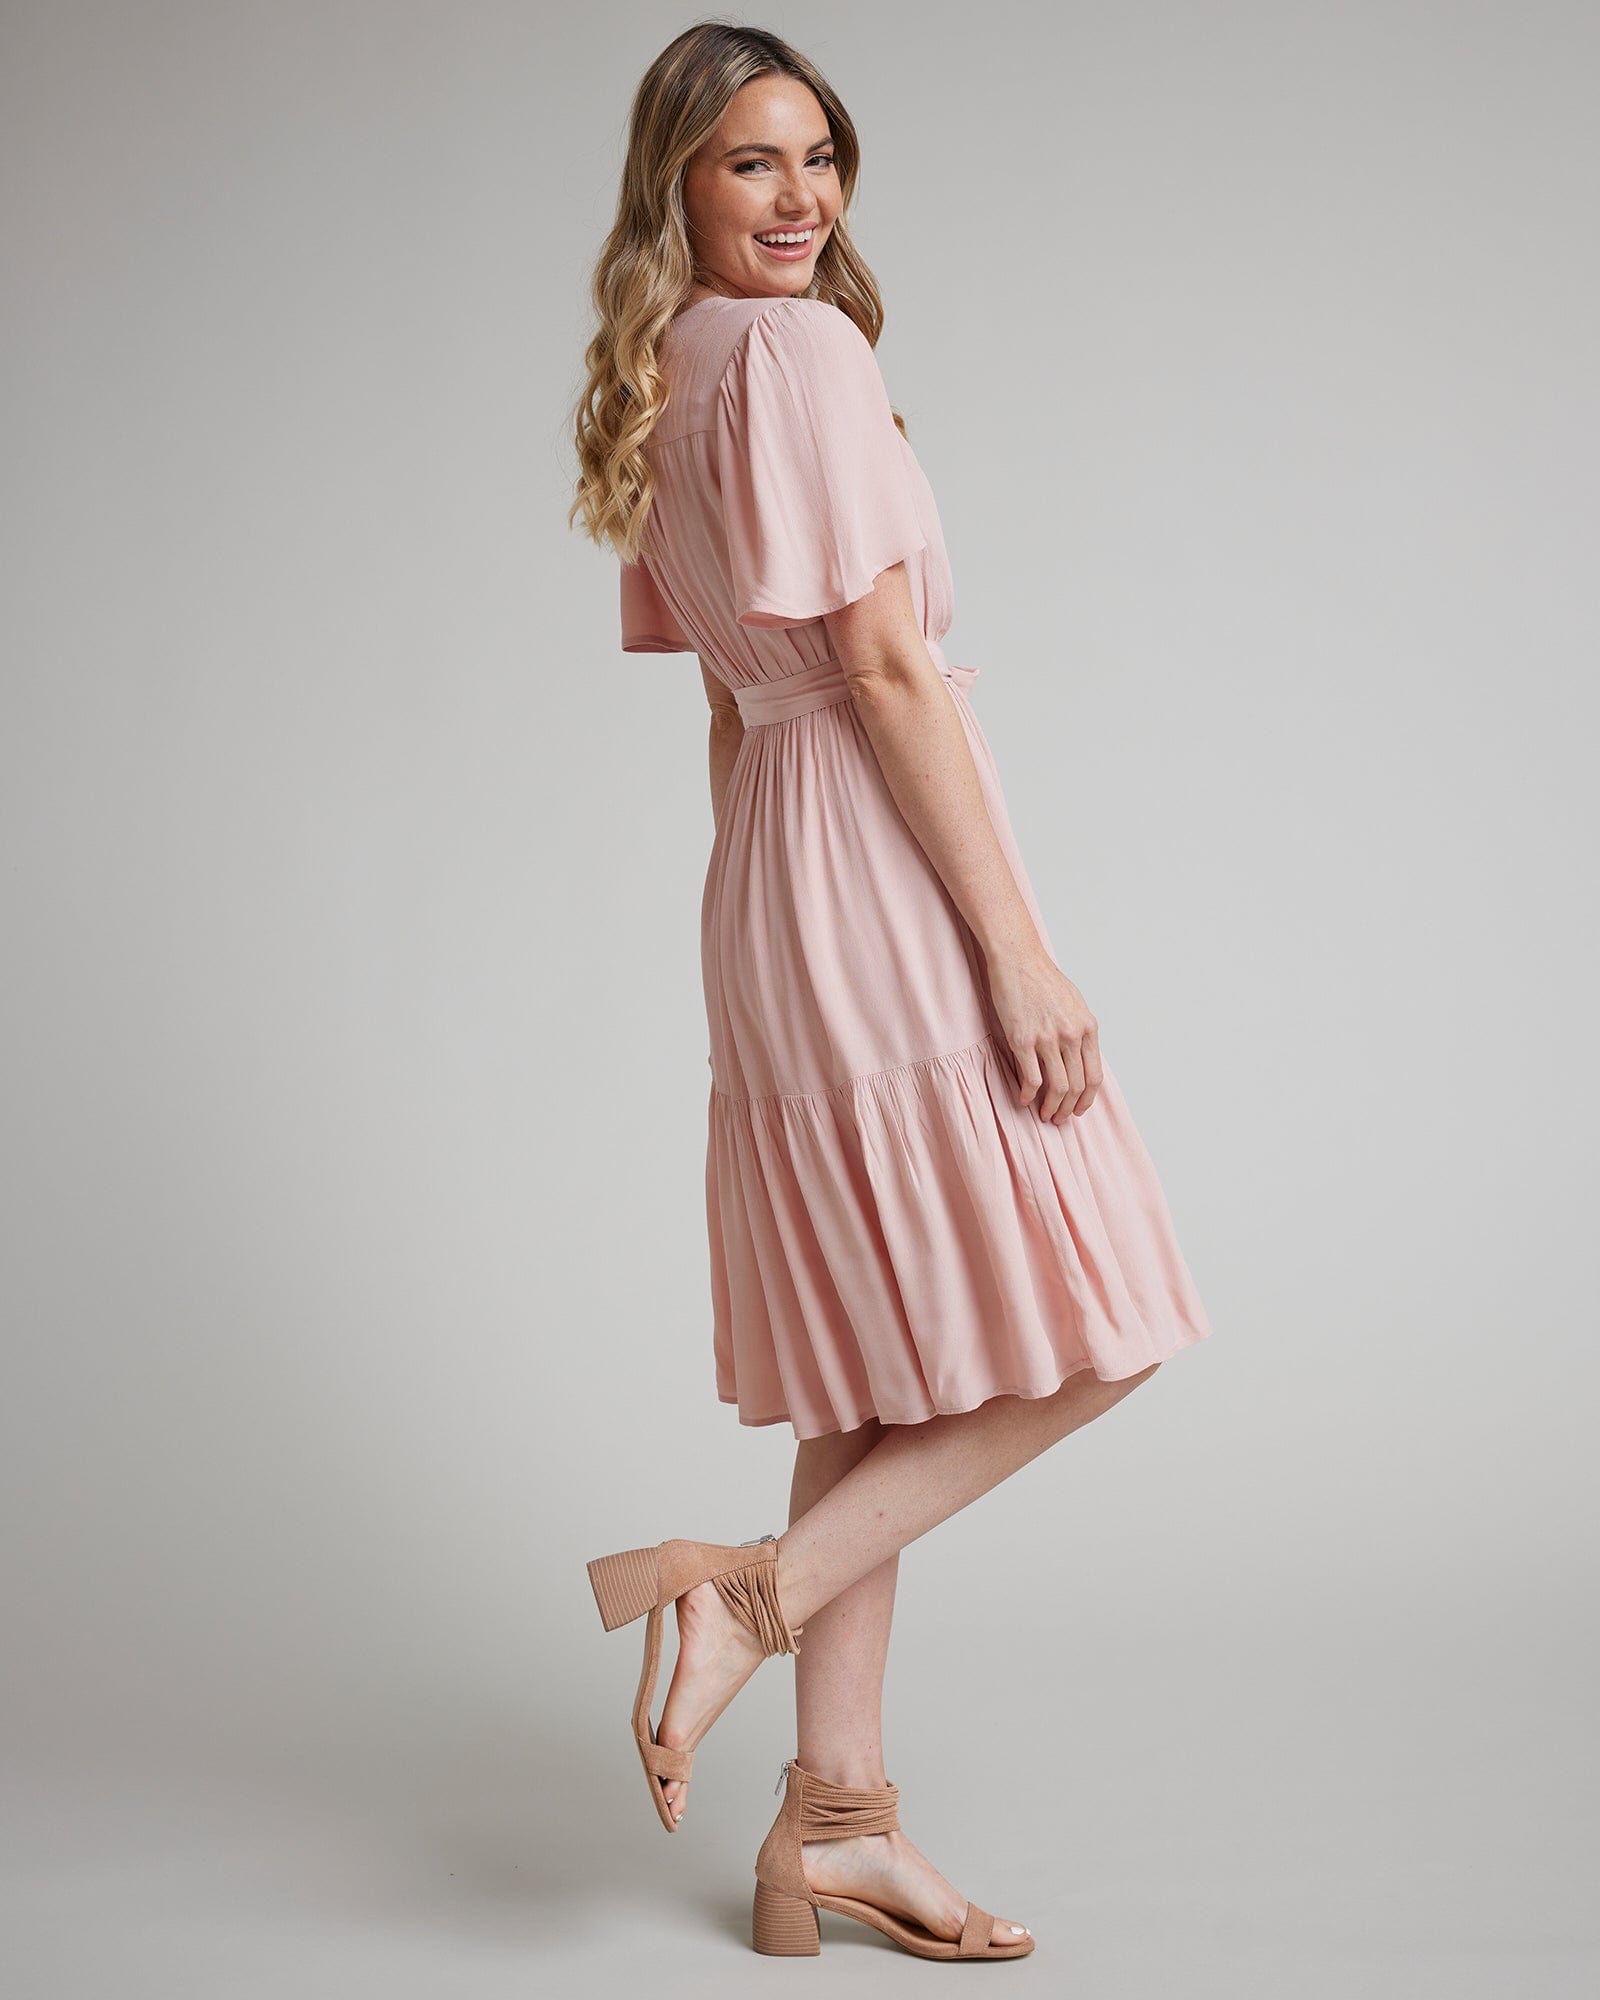 Woman in a short sleeve, knee-length, pink wrap dress